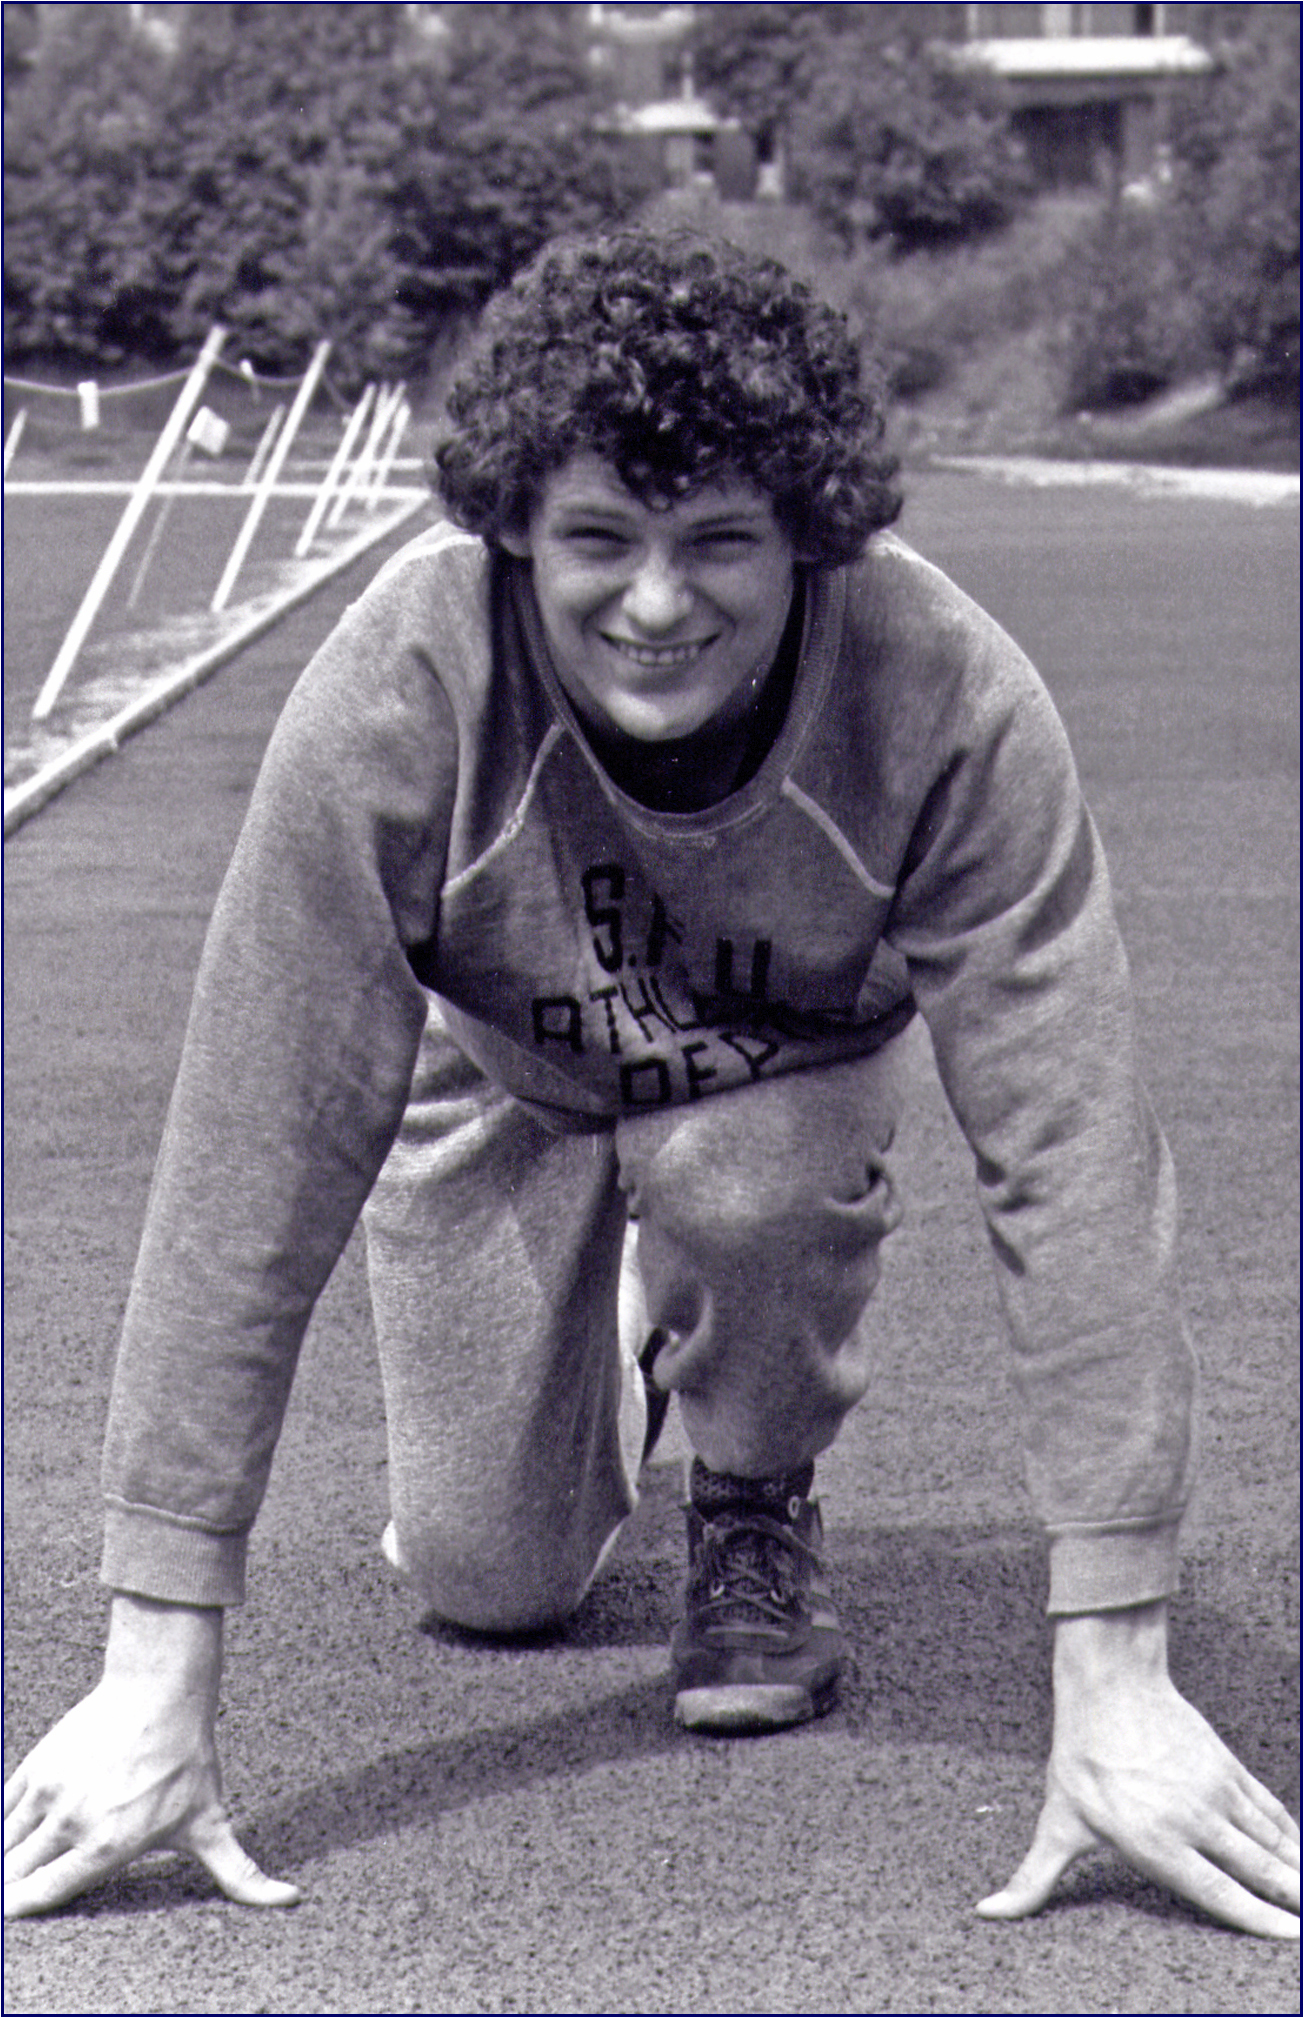 A smiling young man with curly hair wearing a tracksuit poised for a crouch start.